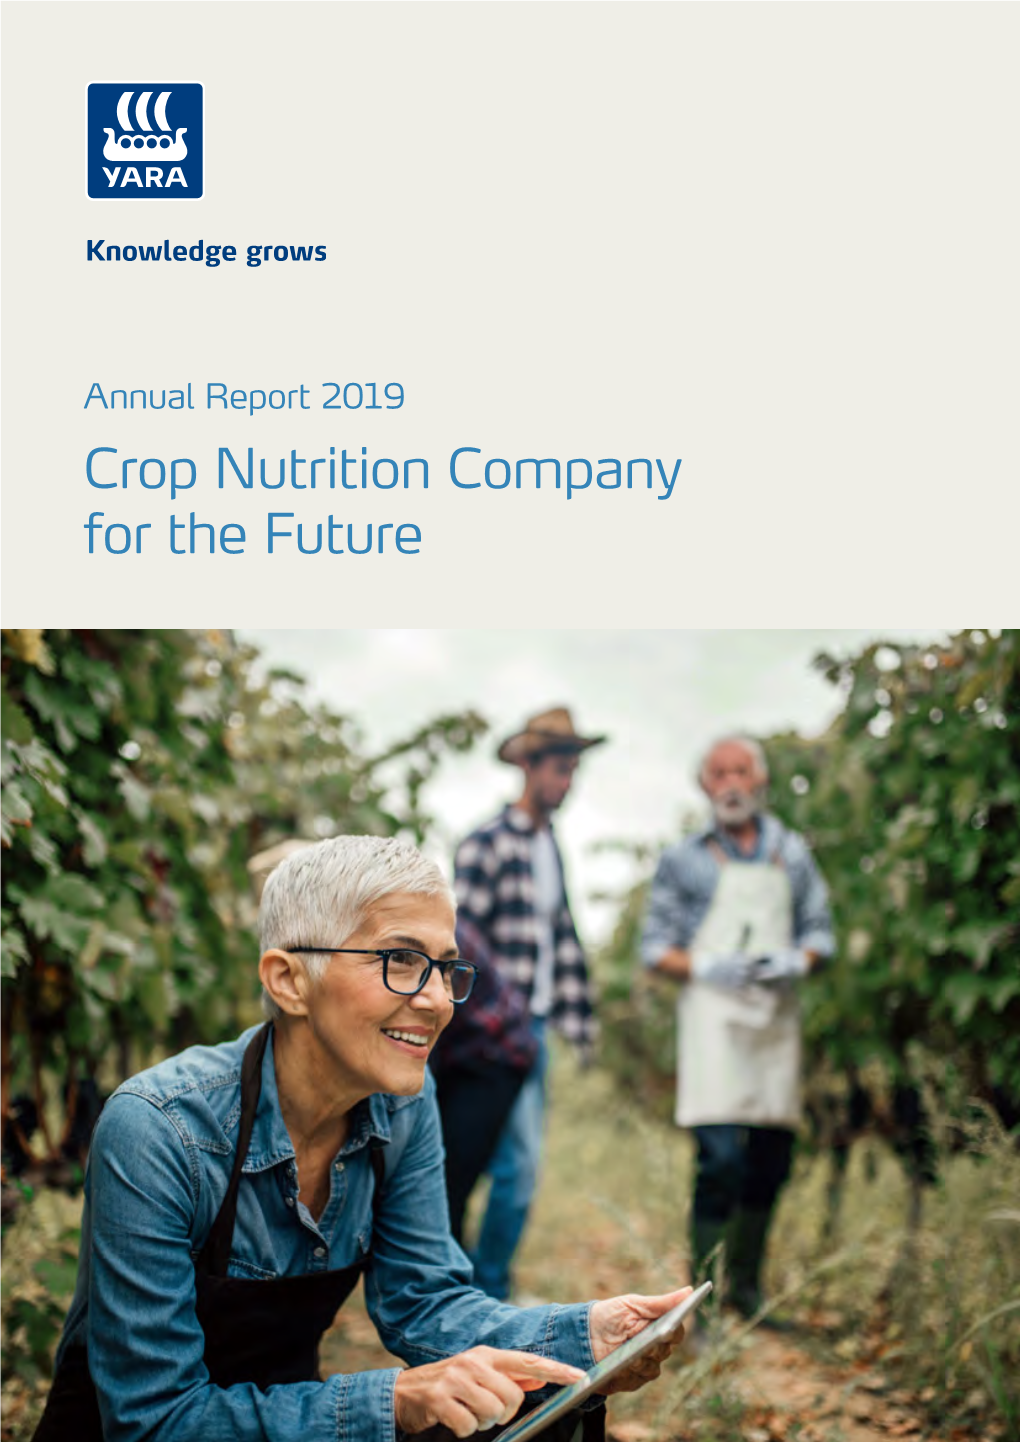 Annual Report 2019 Crop Nutrition Company for the Future Contents